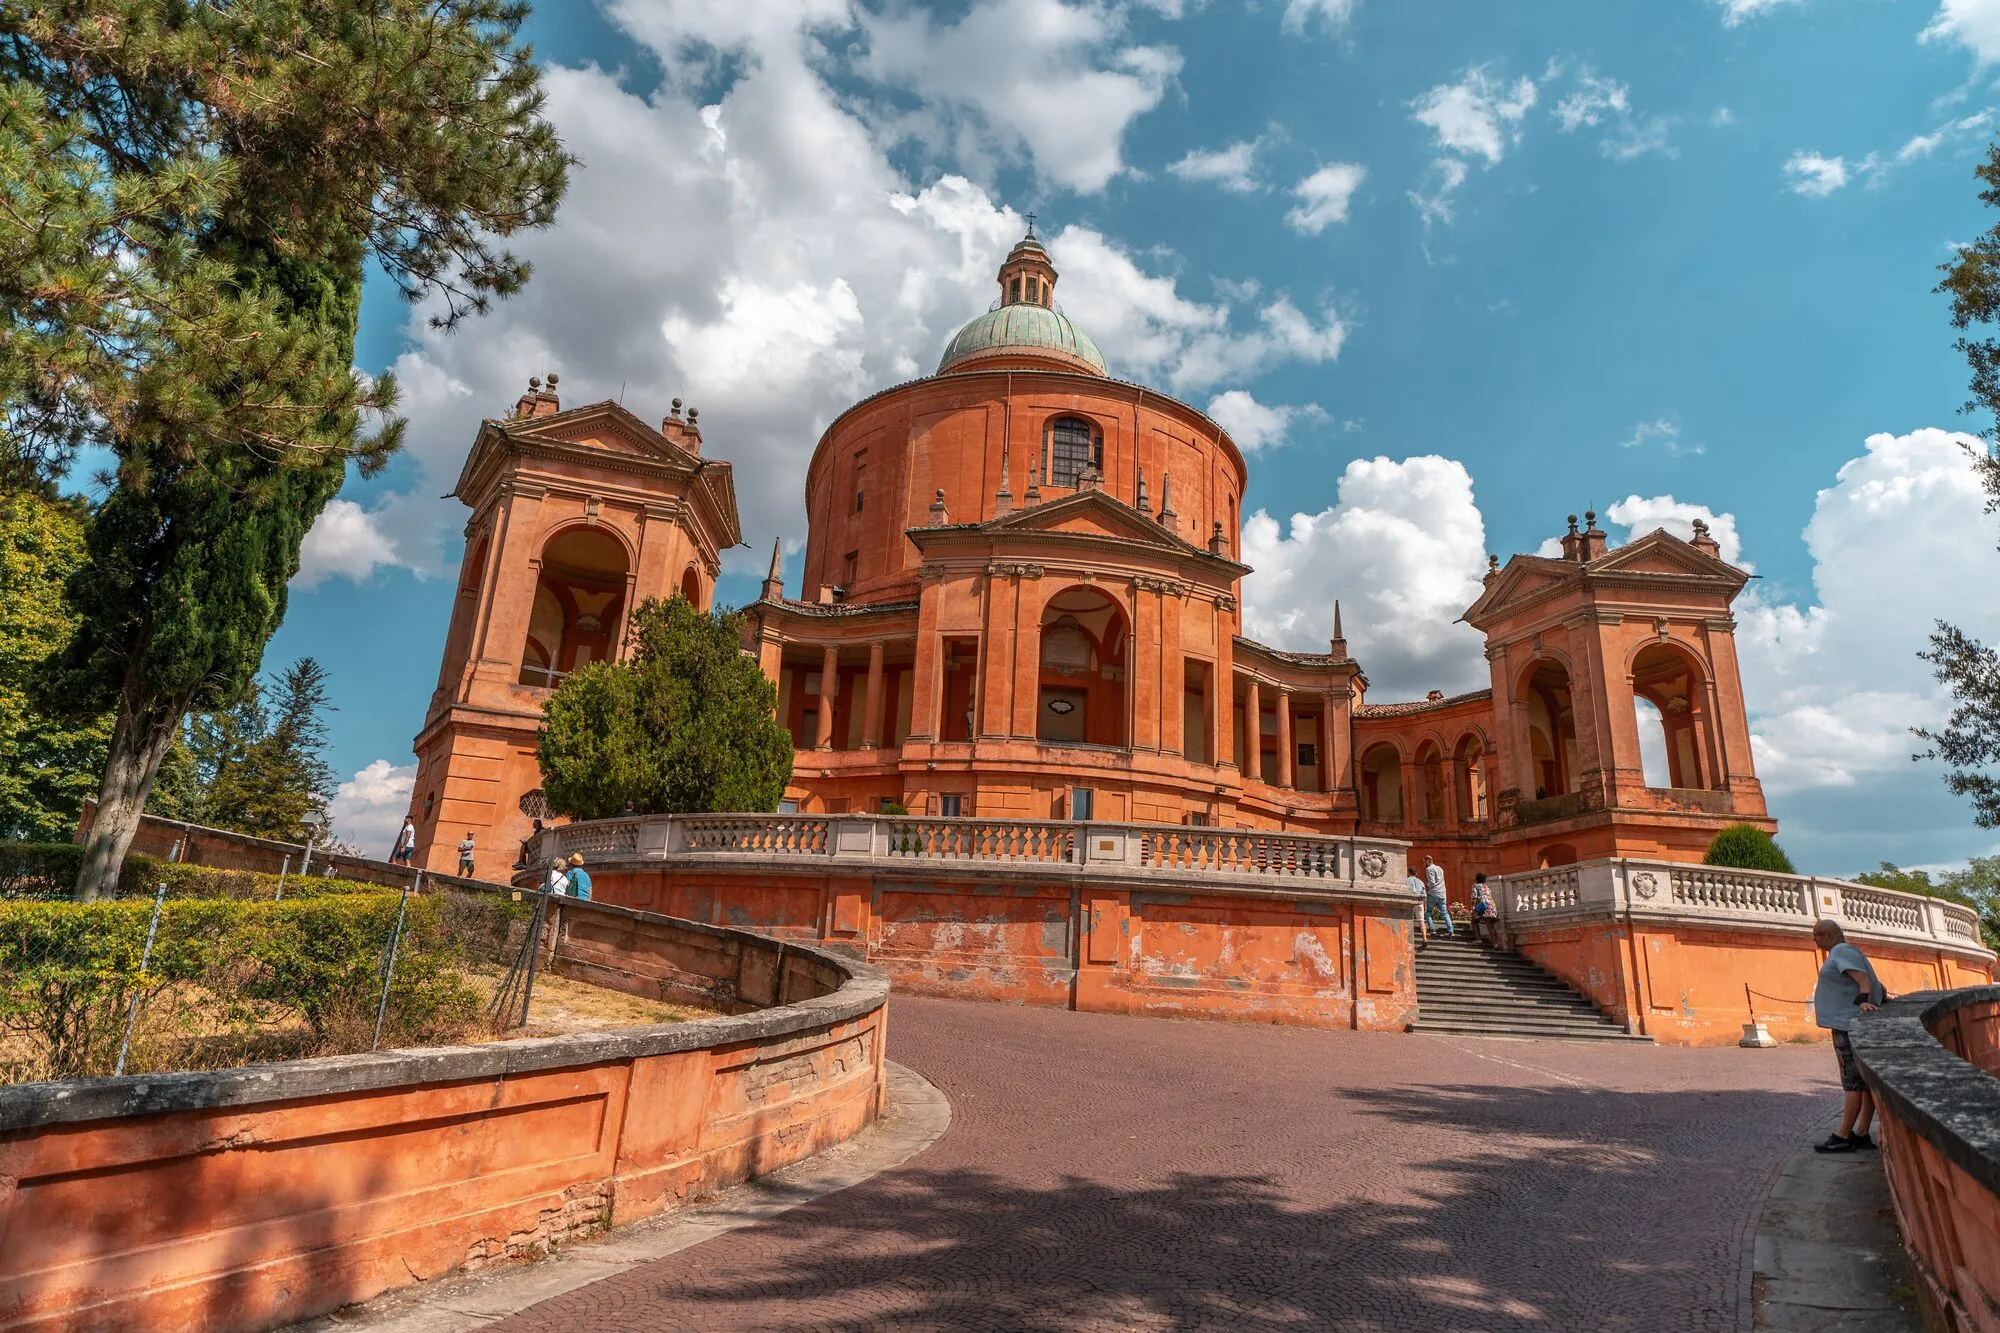 10 Awesome Things to Do in Bologna for First-Timers - A Complete Guide to Backpacking Bologna